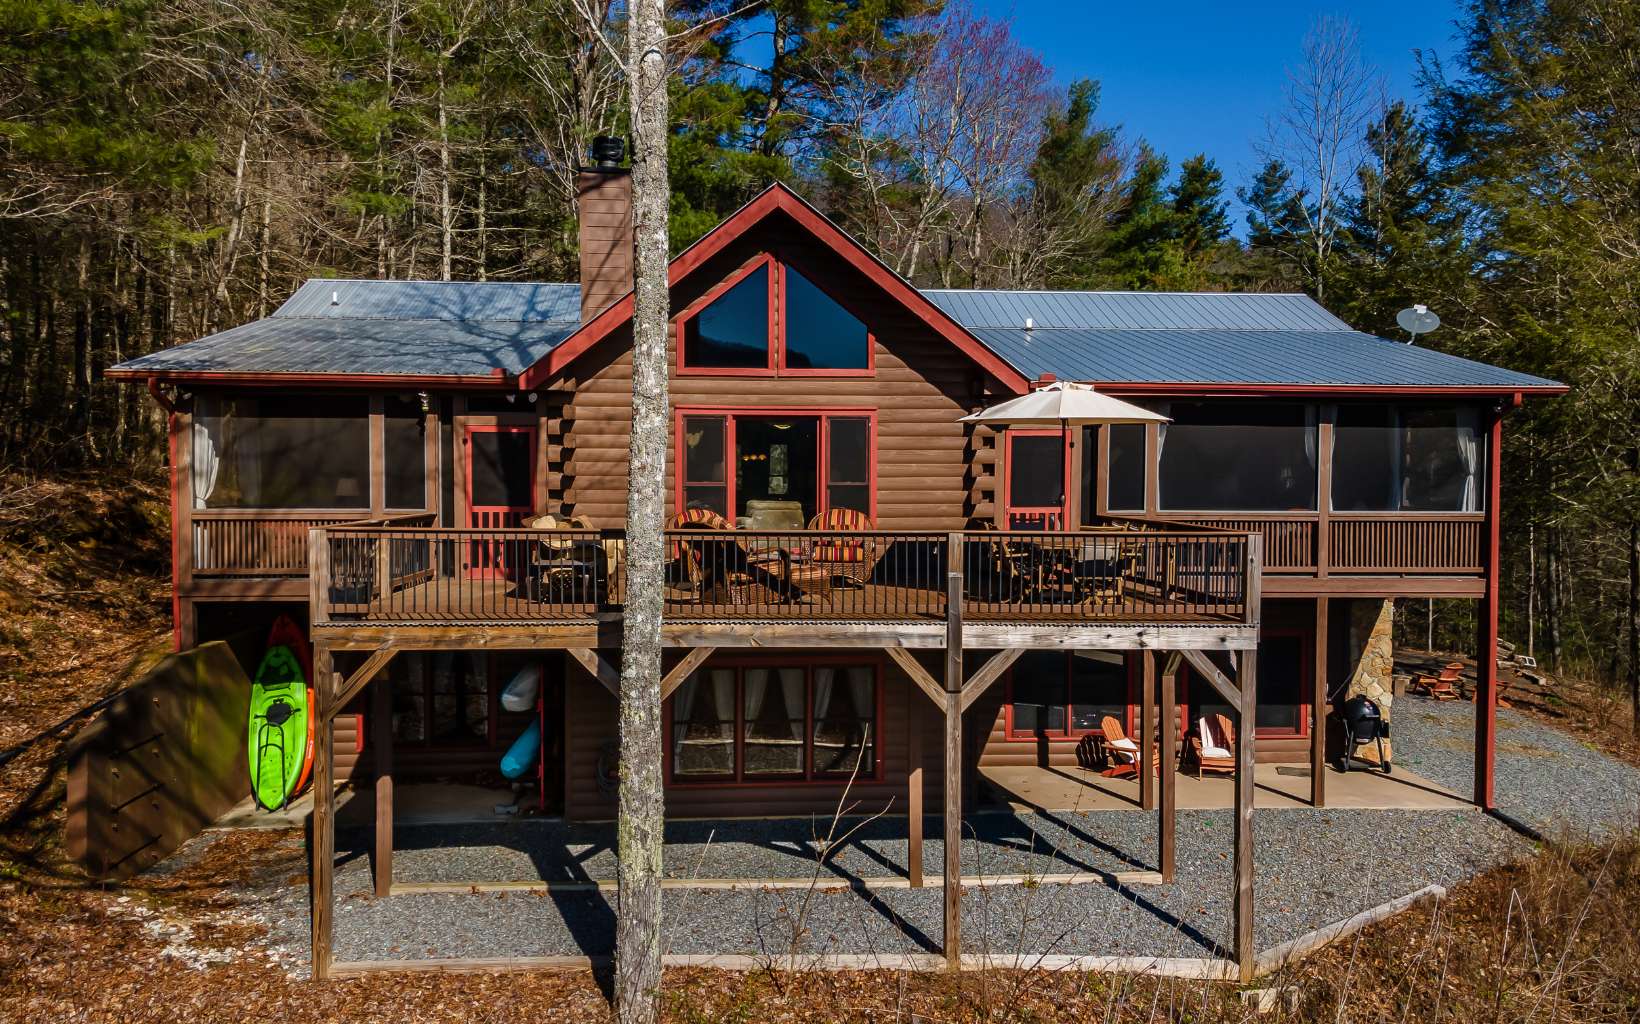 Looking for privacy, acreage, water frontage, and year-round views? How about an excuse to flip the SUV into 4WD/AWD and meander thru the hemlocks, rhododendron, and laurel to this well-maintained 4/3 cabin on 4.56 acres in the heart of 36,000 acres of Cohutta Wilderness? 357 ft of small creek frontage cascading thru the property to join the rushing, noisy waters of Fightingtown Creek below can be heard from any room in the house. On the main level, find an open floorplan w/master suite, 2BR w/shared BA, laundry, two screen porches, oversized deck perched above the crystal, and clear waters that originate in the Cohutta’s and sing to you year-round. All wood interior, plus fully finished basement with wet bar, additional BR/BA, “drive under” garage, and firepit. The driveway is partially paved, but 4WD/AWD is required